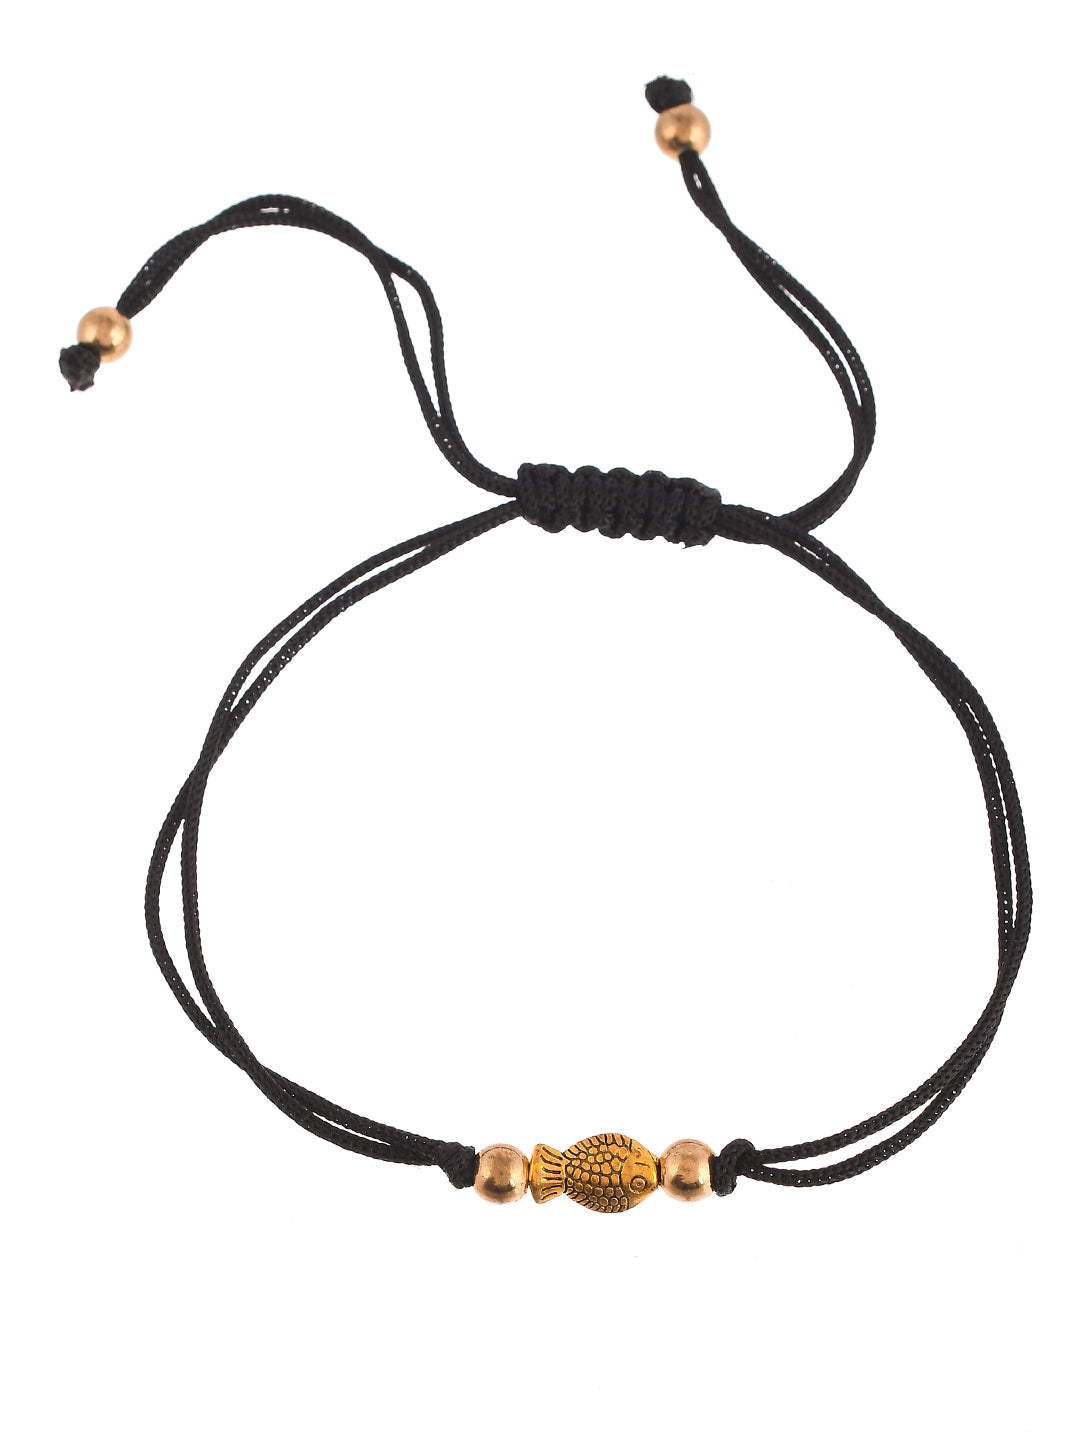 Gold Fish Charm Beads Black Thread Anklet